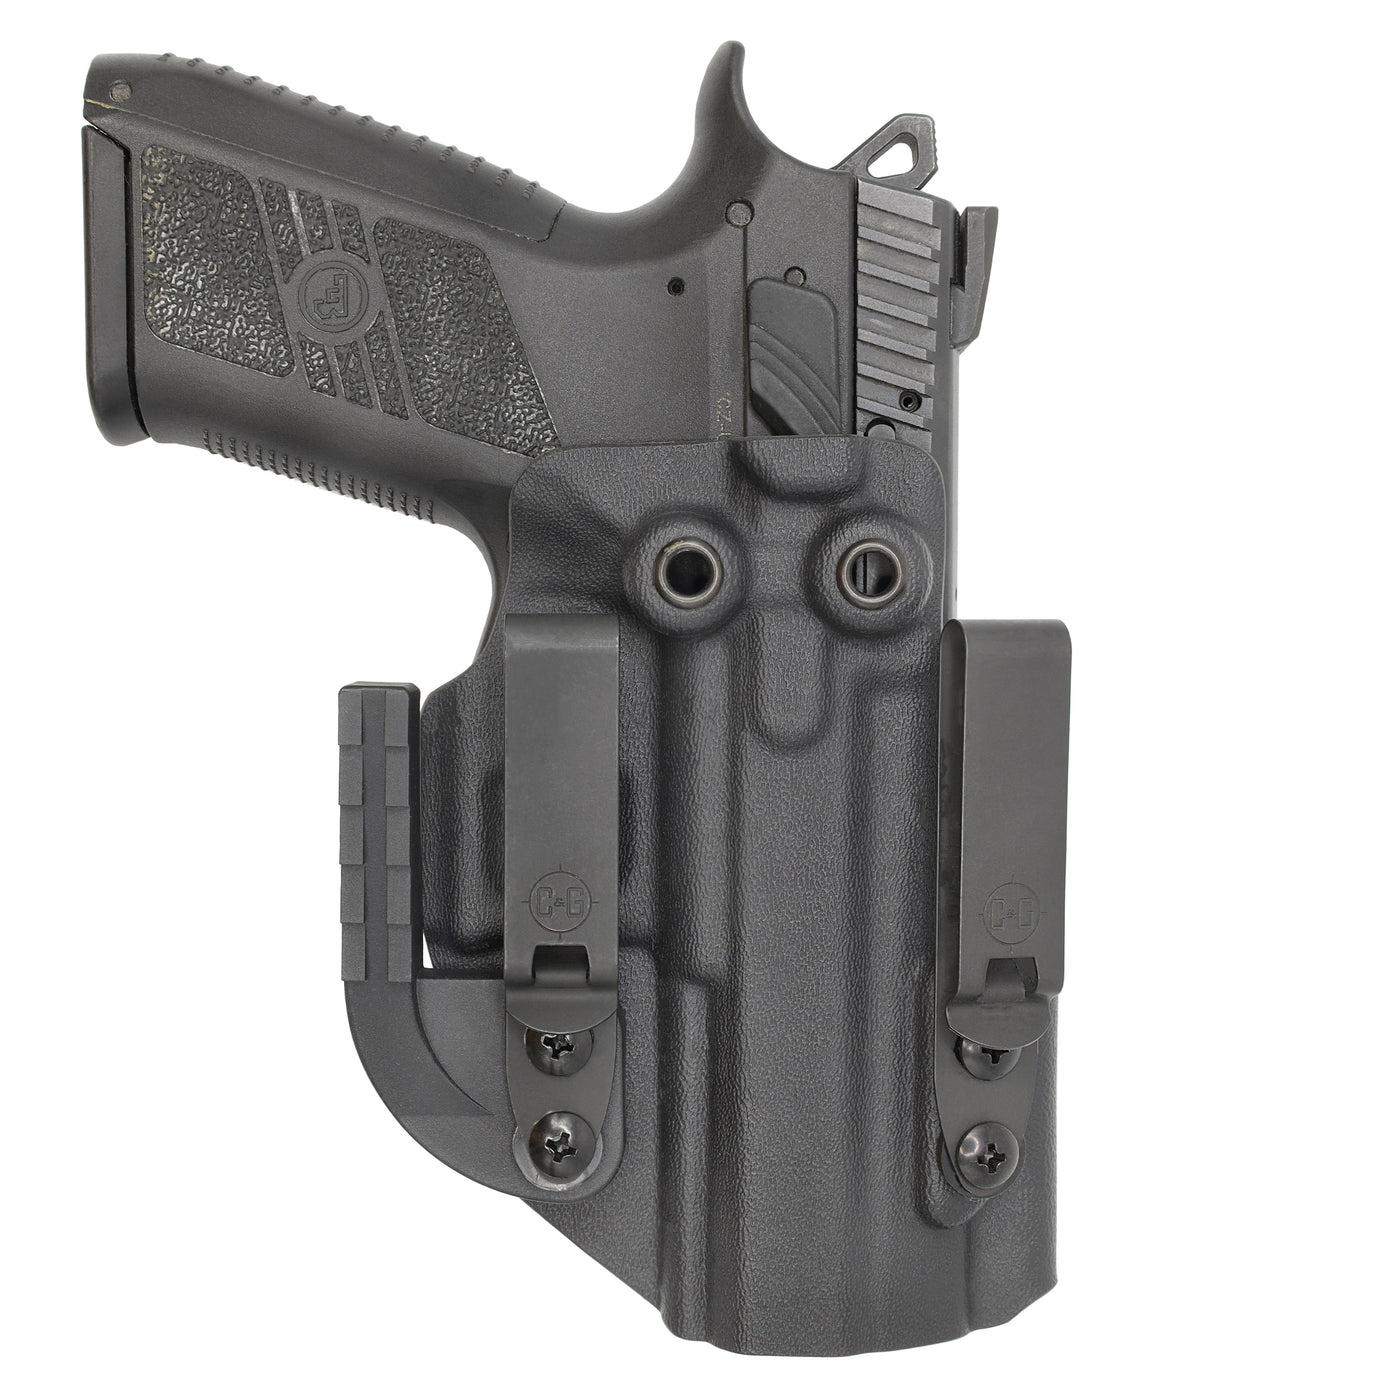 C&G Holsters Quickship IWB ALPHA UPGRADE Covert CZ P07 in holstered position